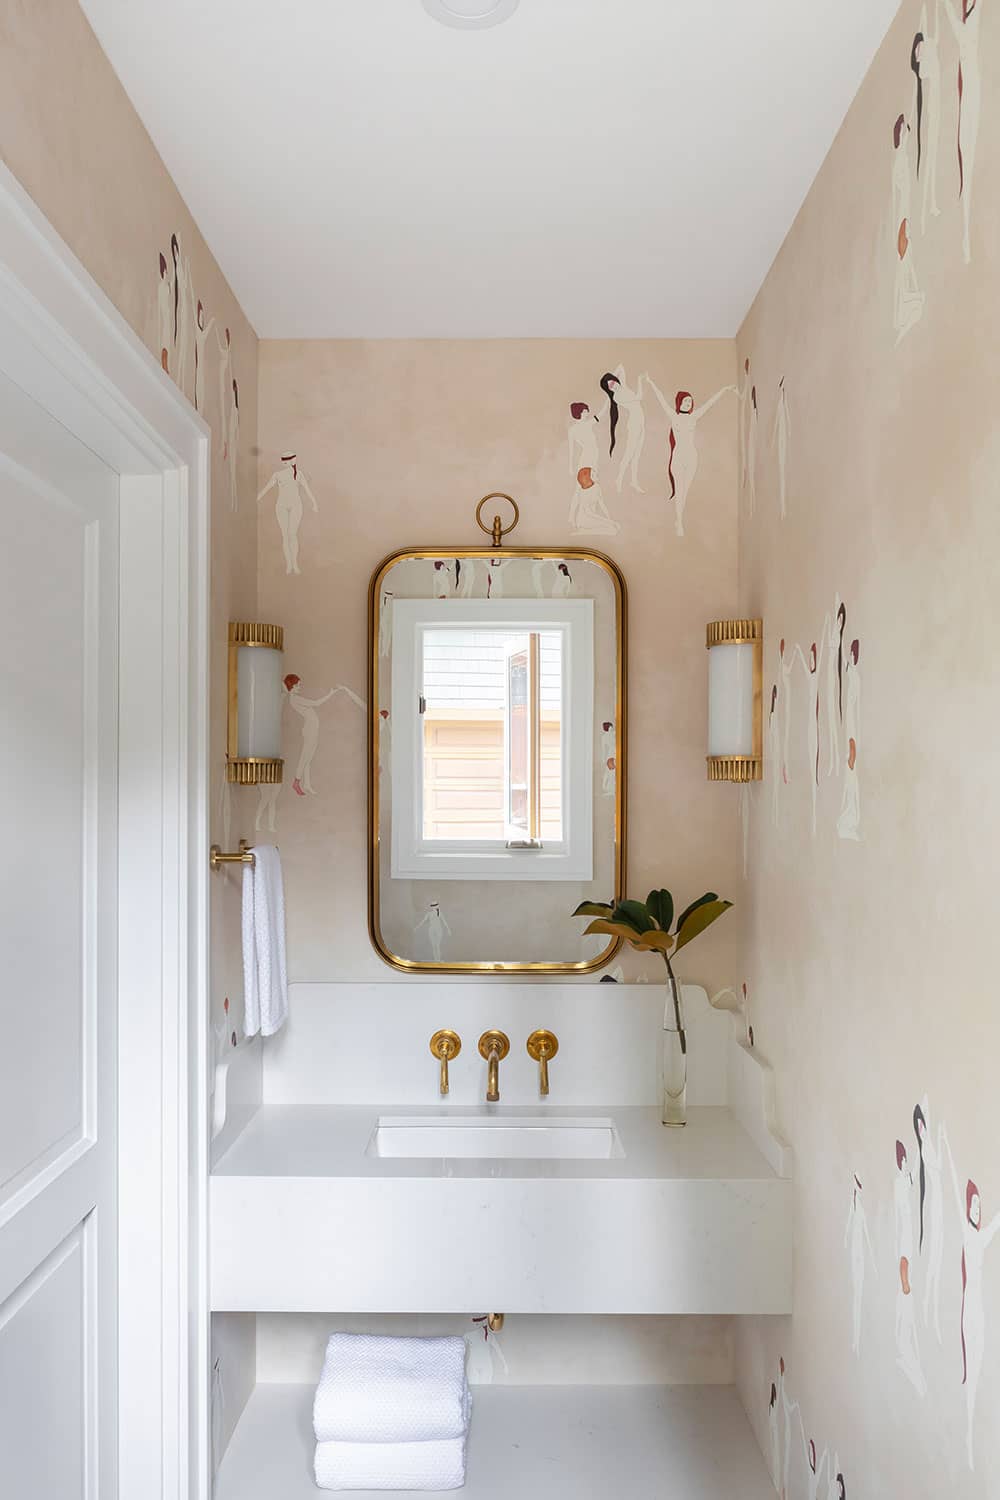 renovated powder room with designer wallpaper, brass fixtures and modern farmhouse sink